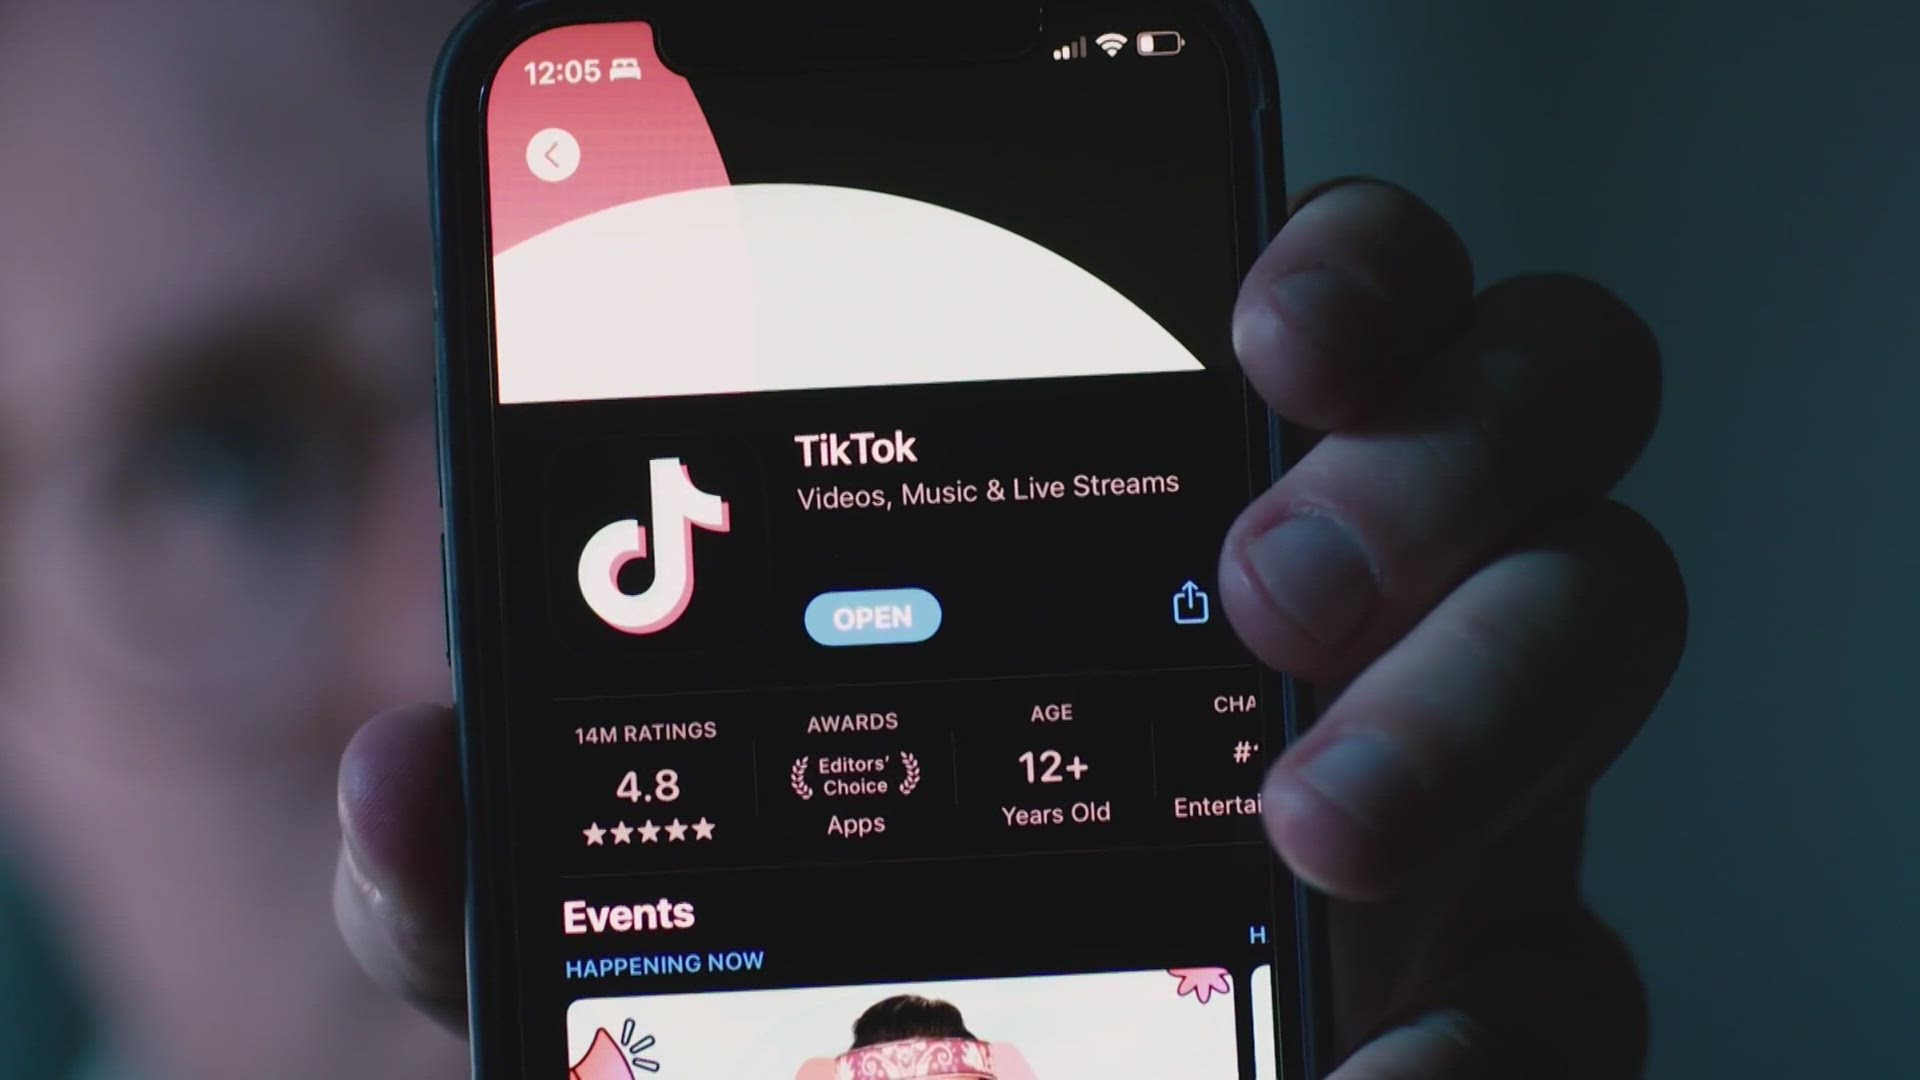 Opponents of TikTok call the app a "national security risk" due to its ownership by Chinese tech company ByteDance